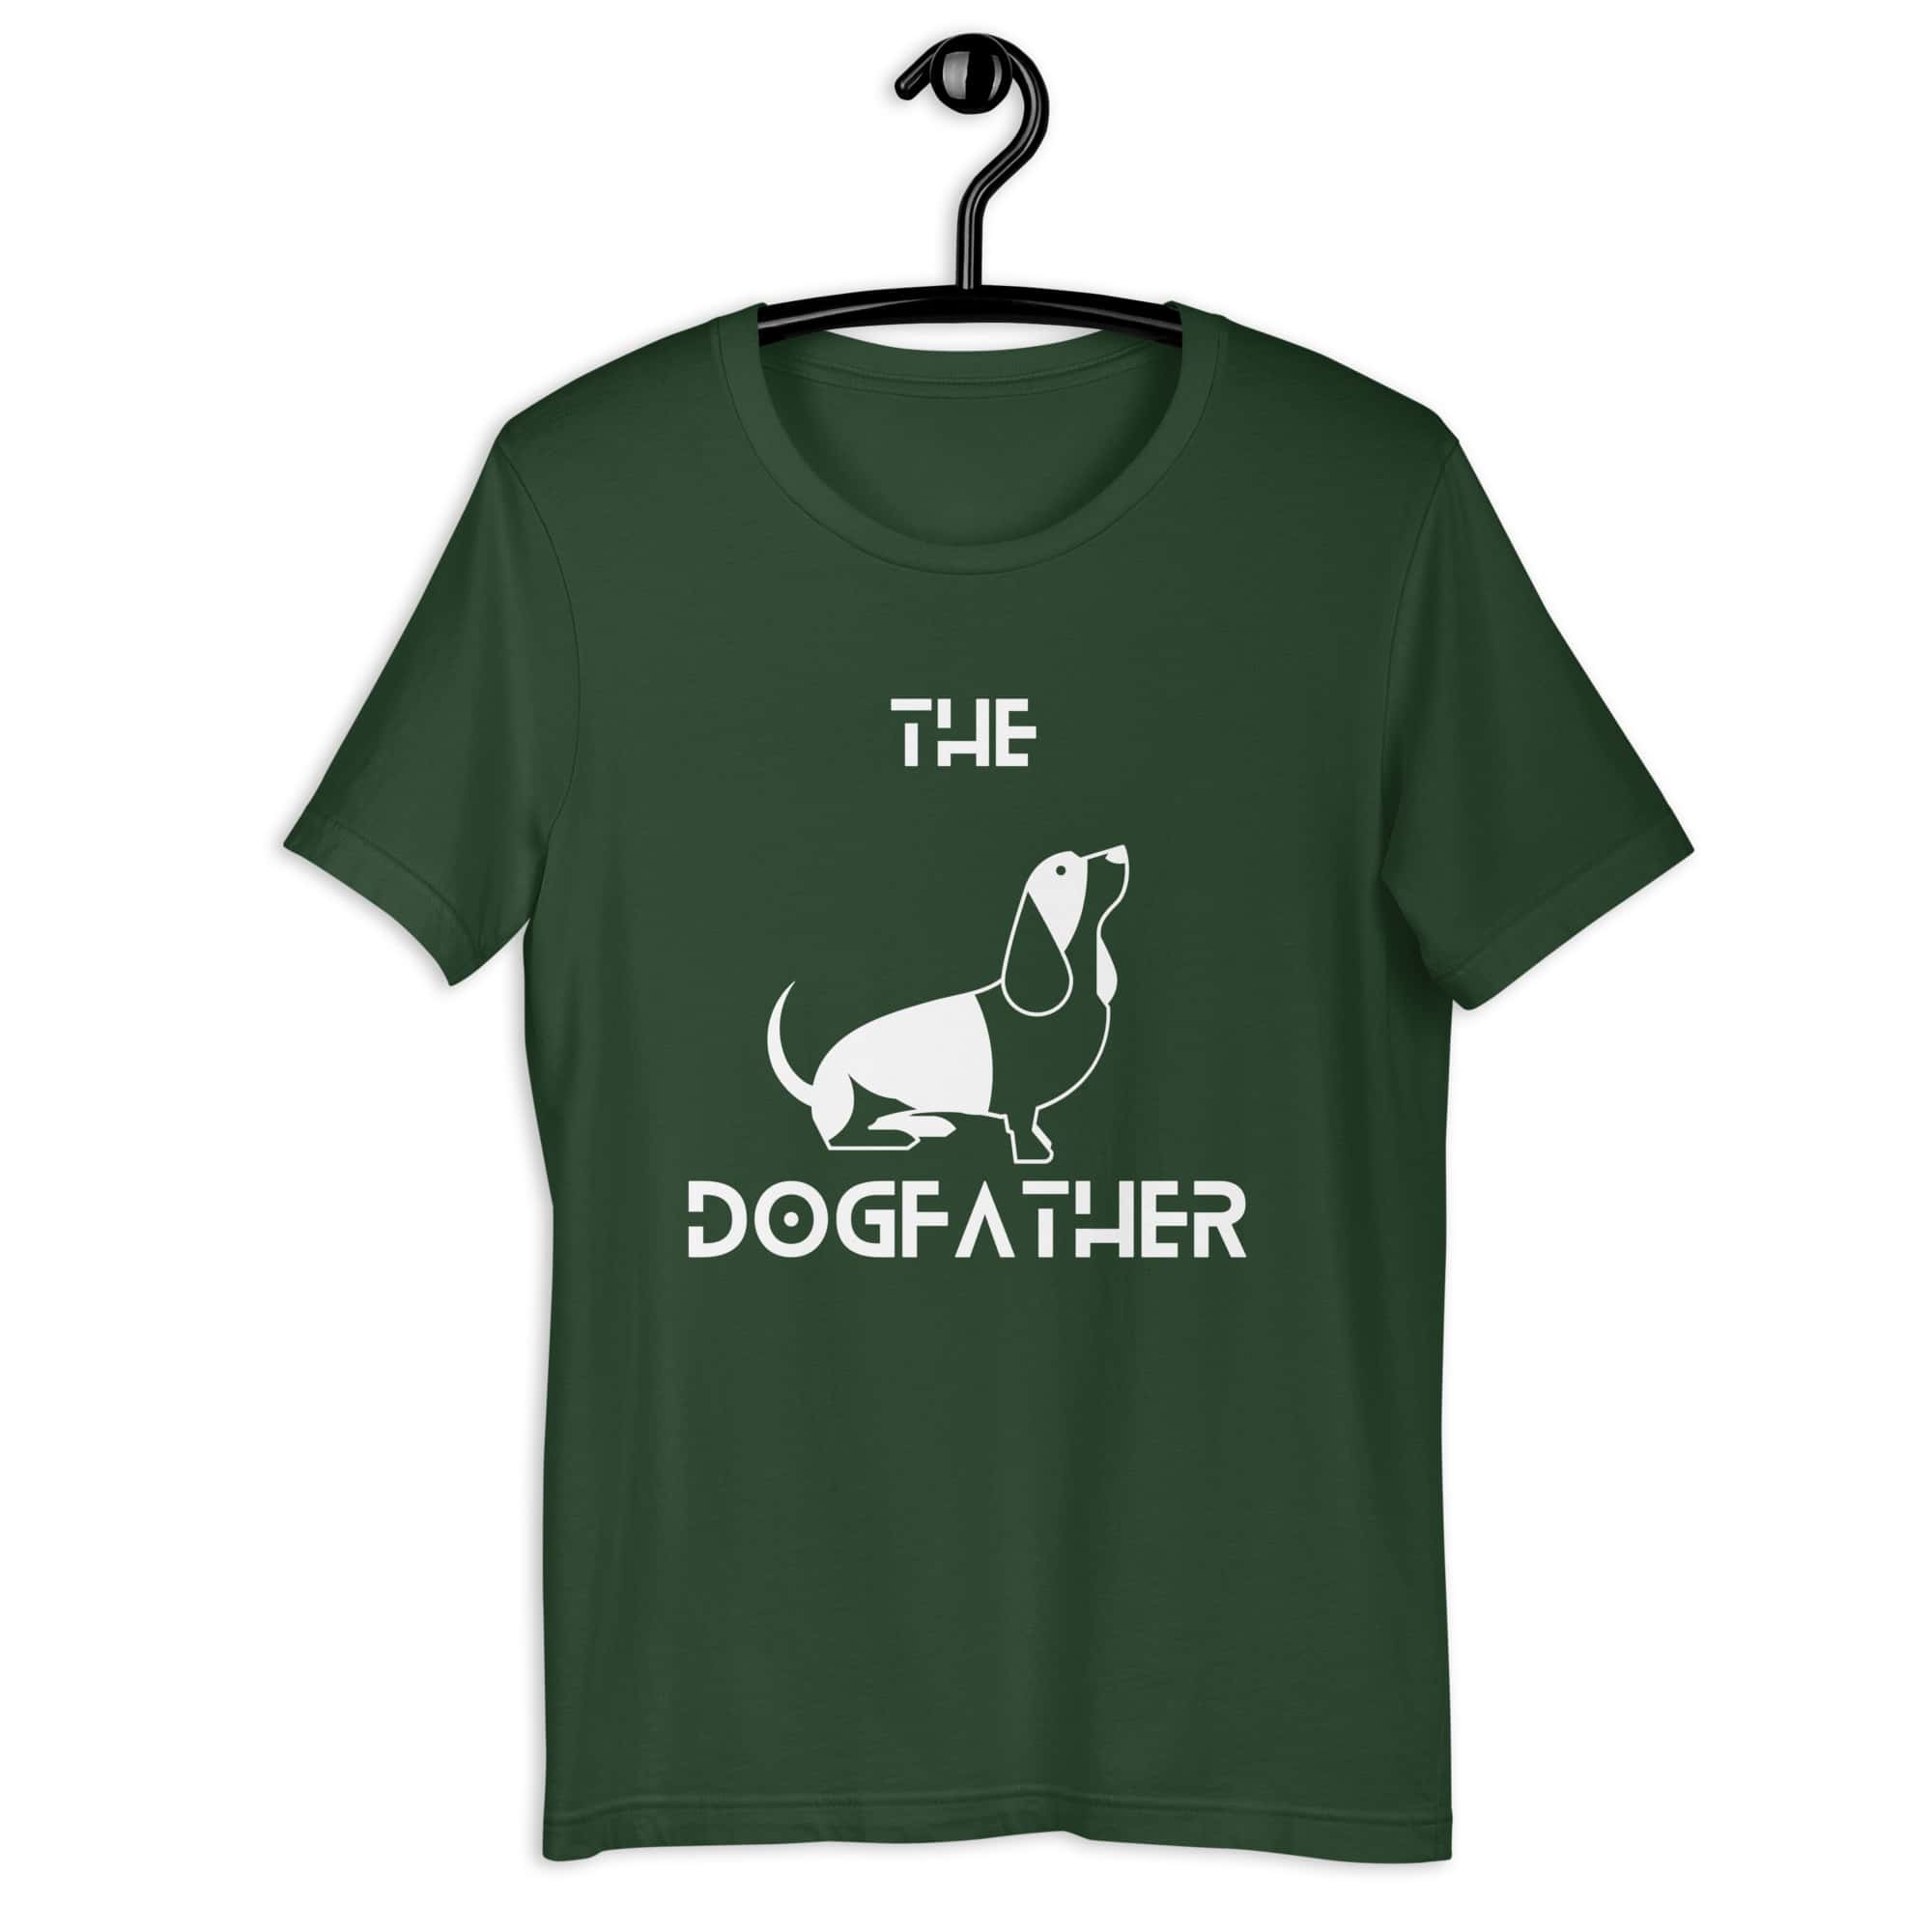 The Dogfather Hounds Unisex T-Shirt. Forest